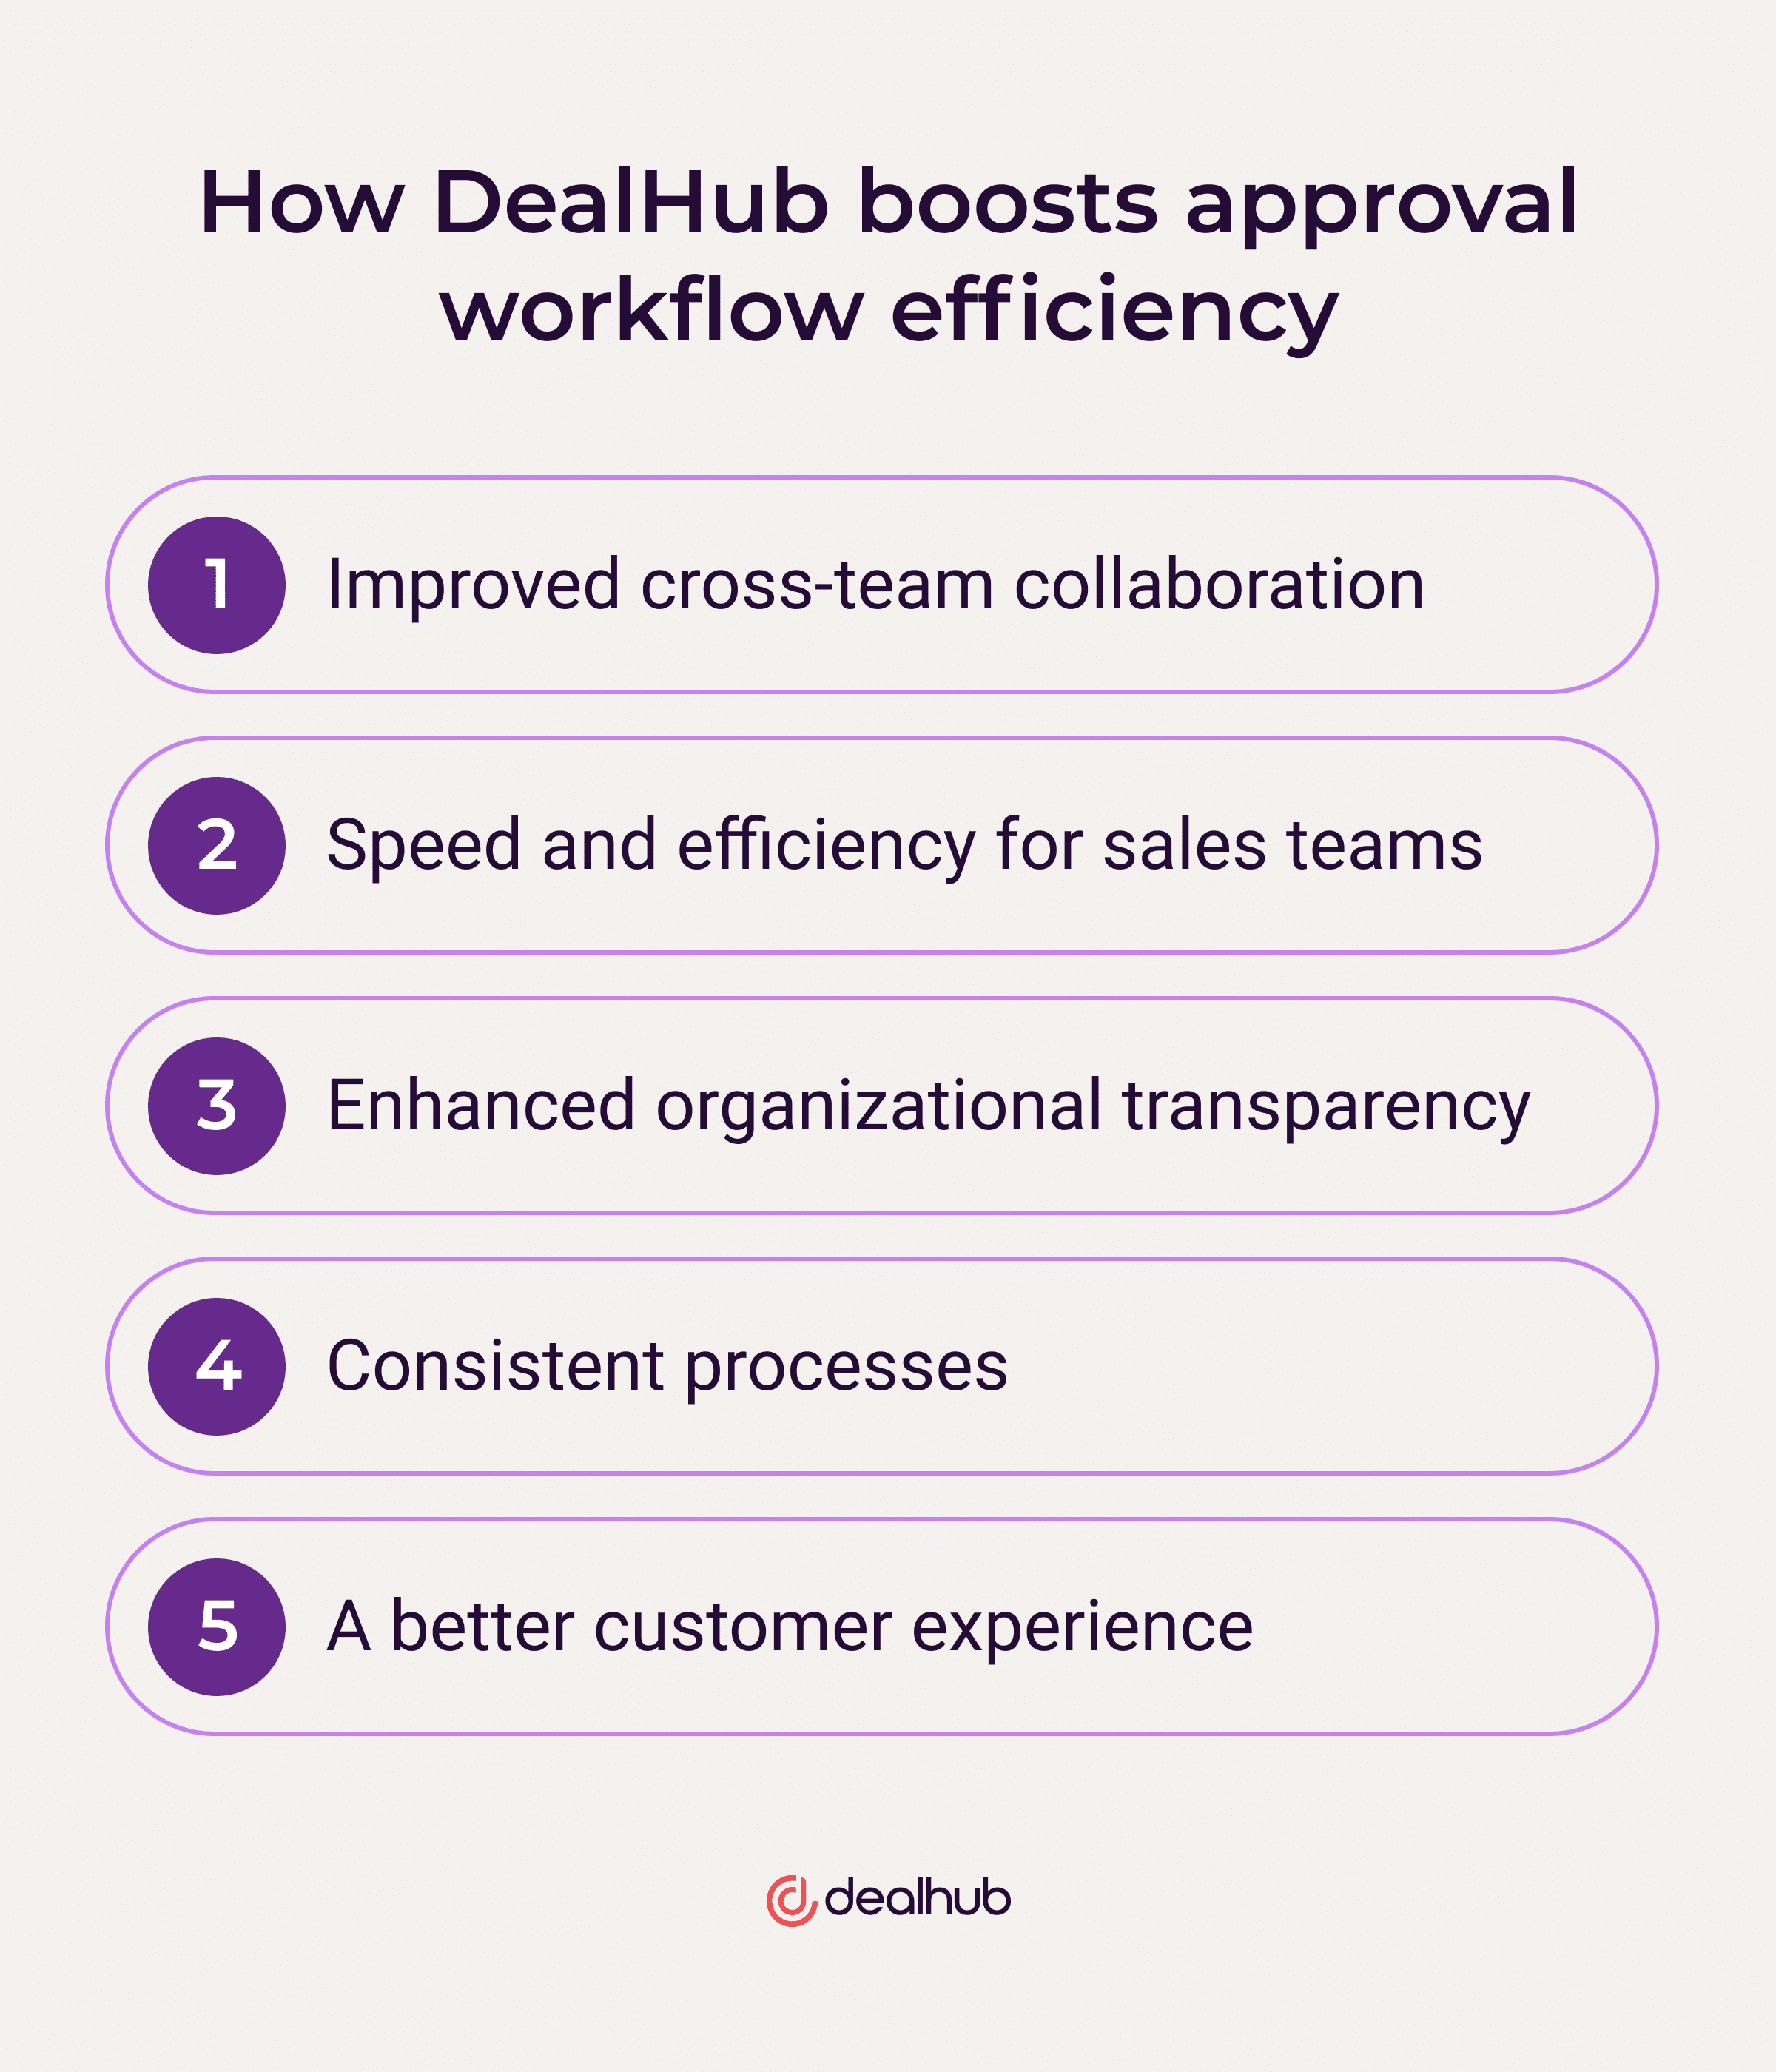 How DealHub boosts approval workflow efficiency